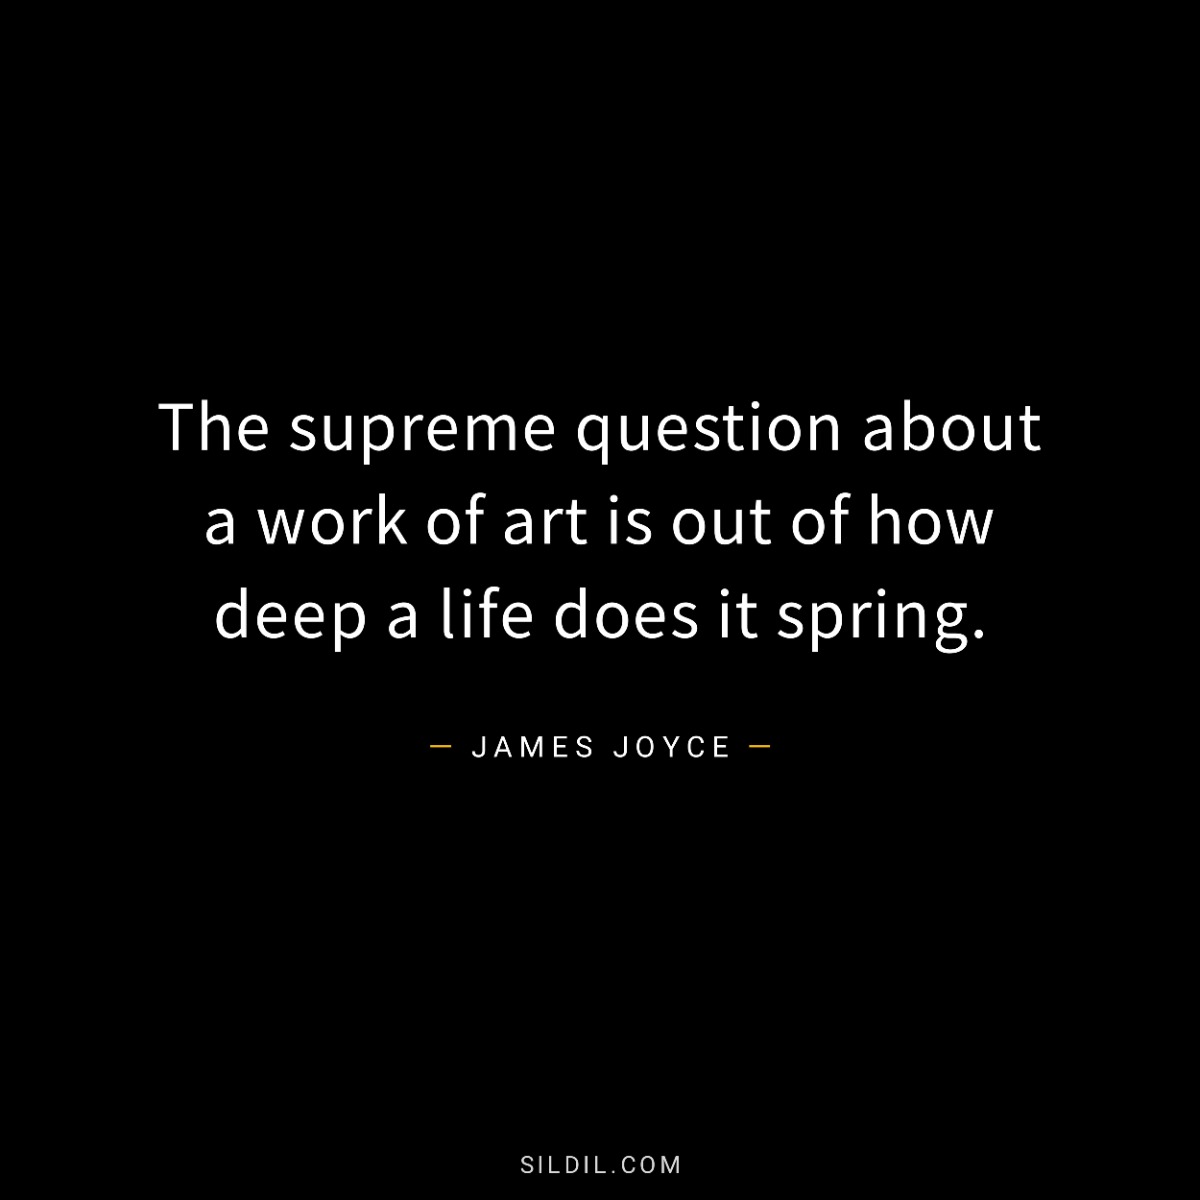 The supreme question about a work of art is out of how deep a life does it spring.